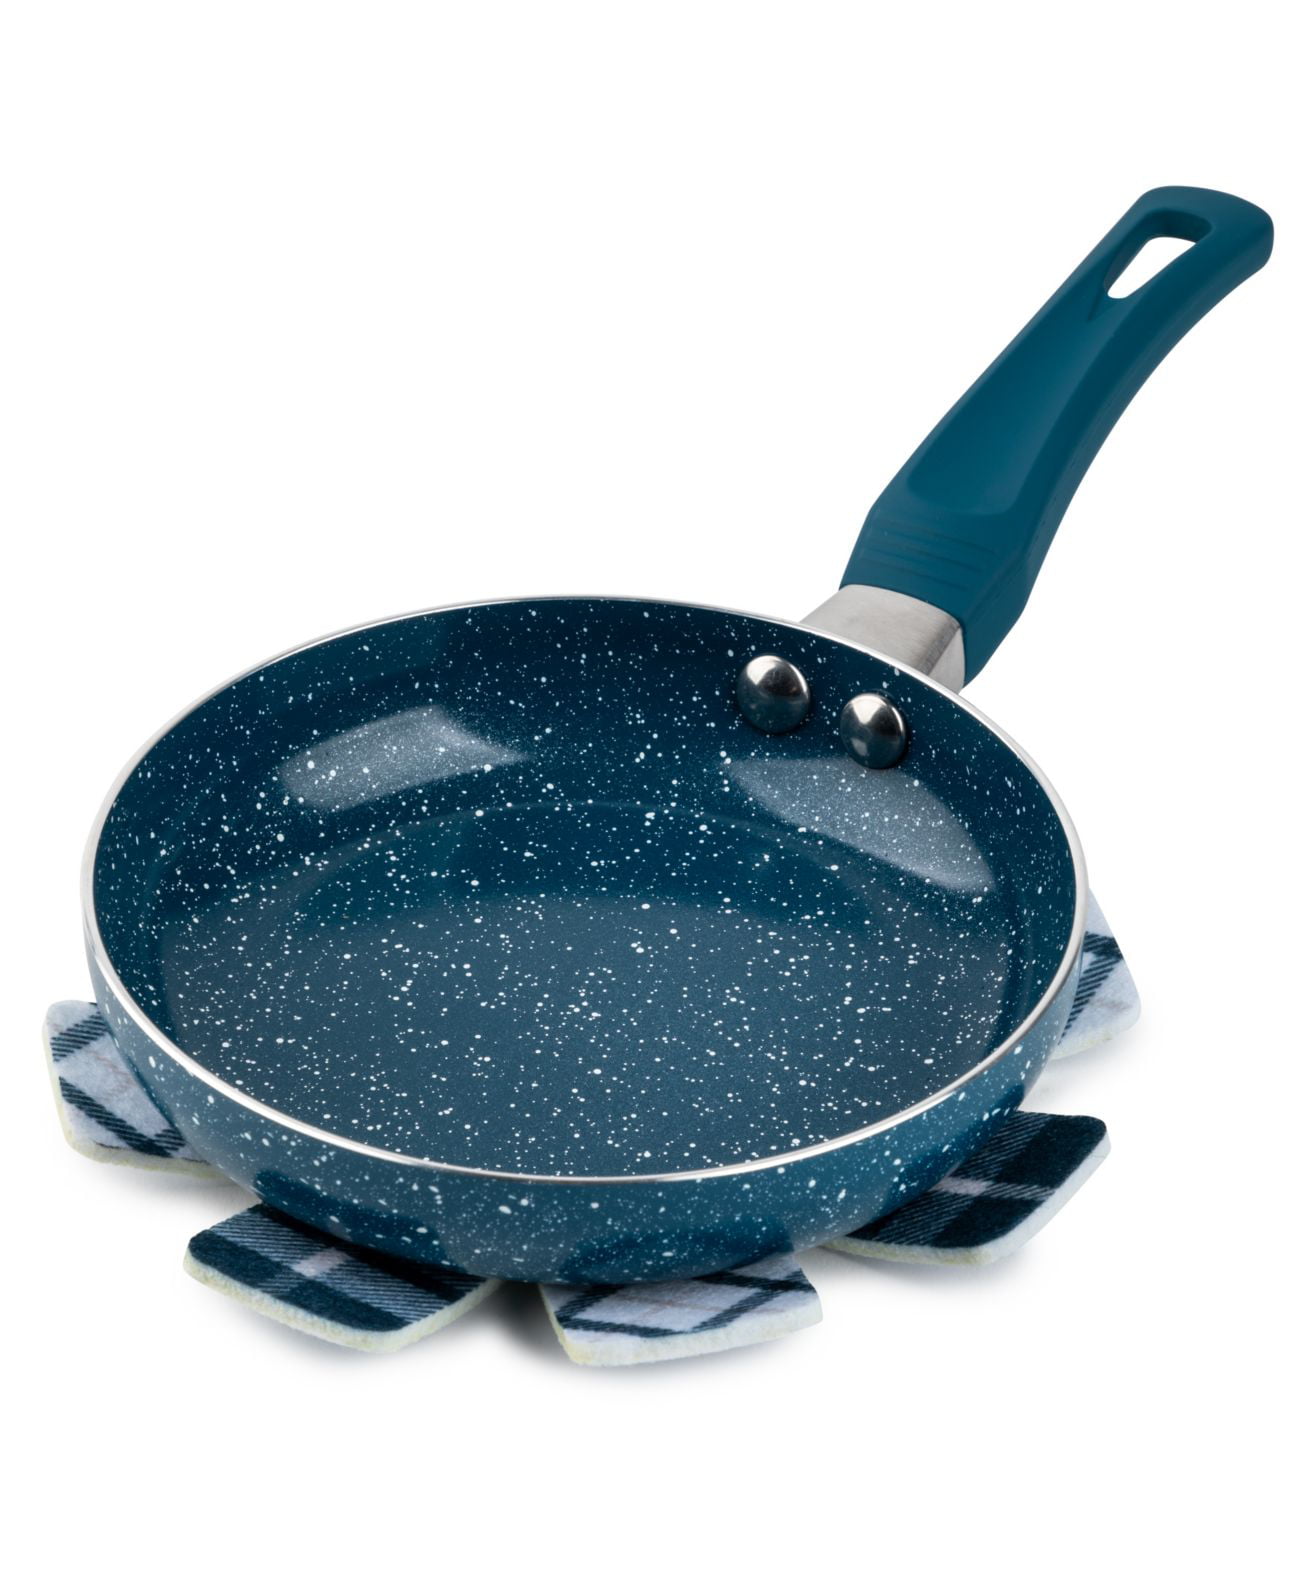 Brooklyn Steel Co. Jupiter 8 and 10 Fry Pans with Felt Cookware Protectors - Navy